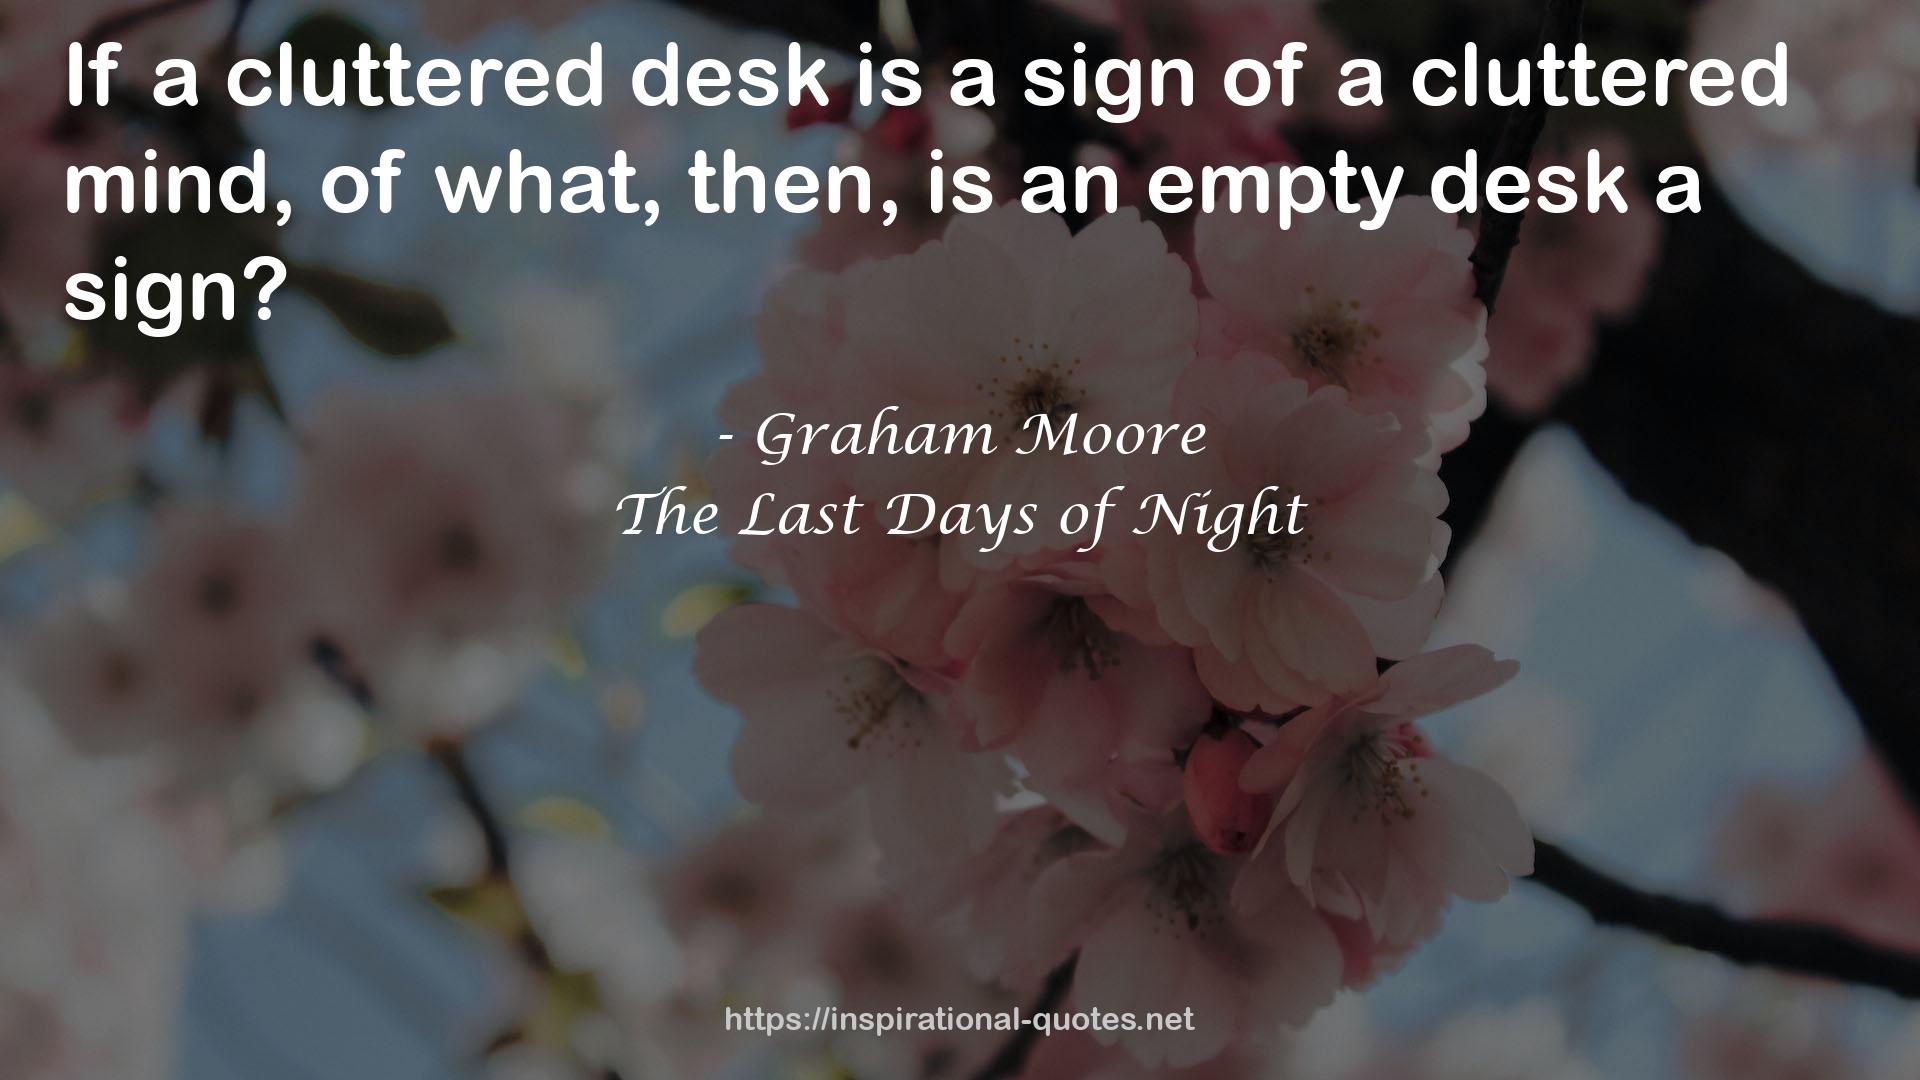 Graham Moore QUOTES